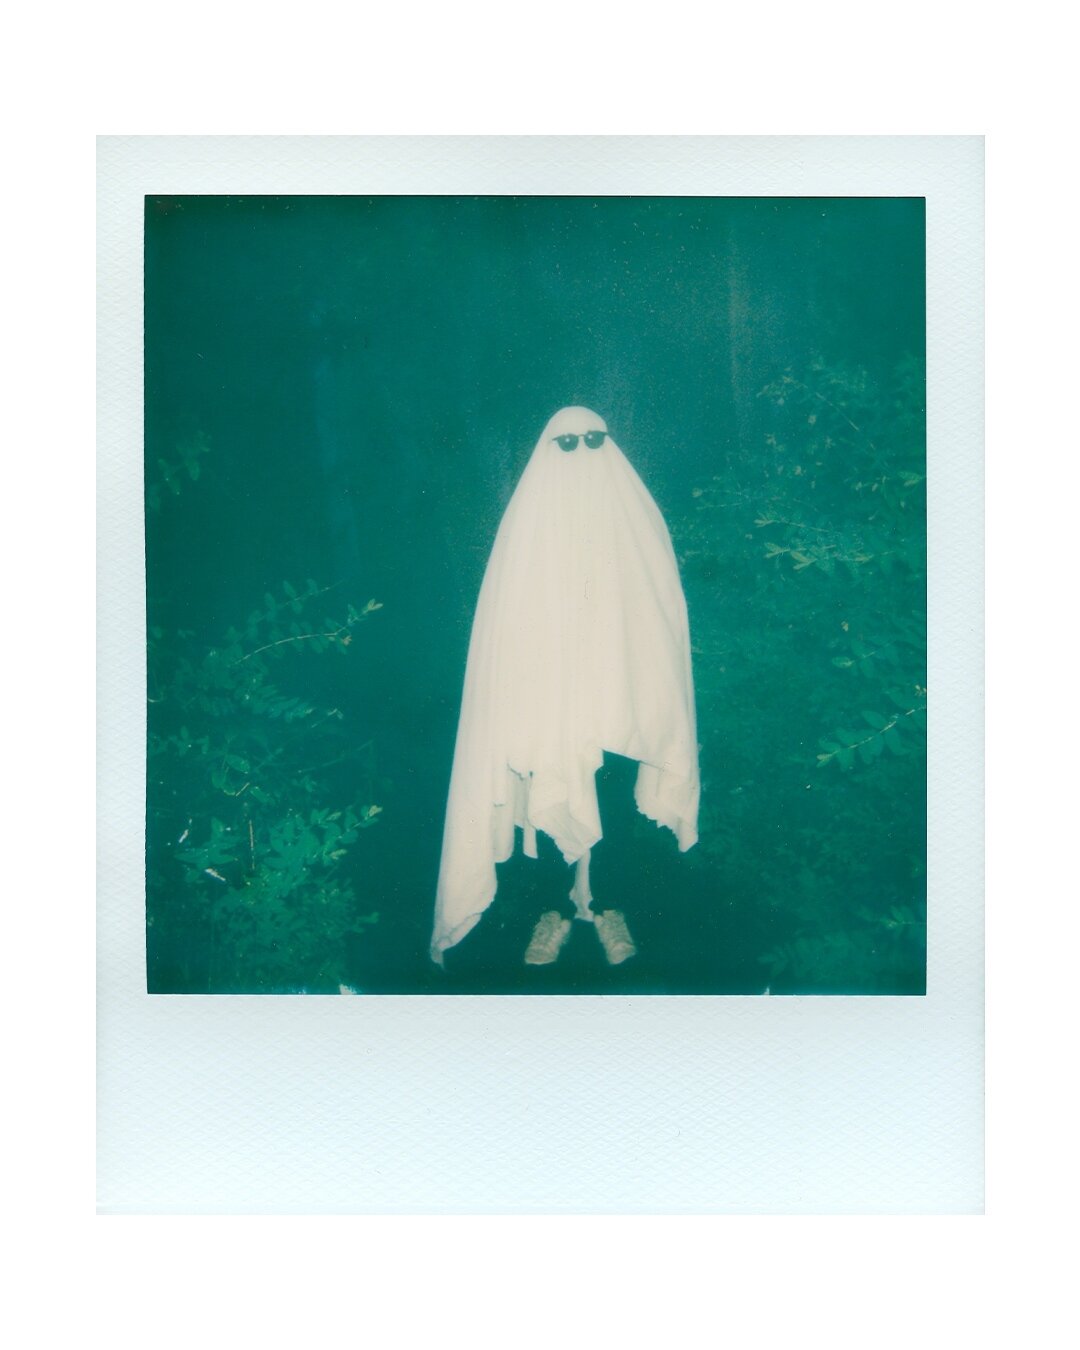 Late to post these before Halloween, but here's some polaroids from the October @westcoast.creatives meetup!⁠
//⁠
shot on: Polaroid Impulse AF⁠
film: Polaroid 600⁠
//⁠
//⁠
//⁠
//⁠
//⁠
#sanfranciscophotographer #sfphotographer #bayareaphotographer #ba